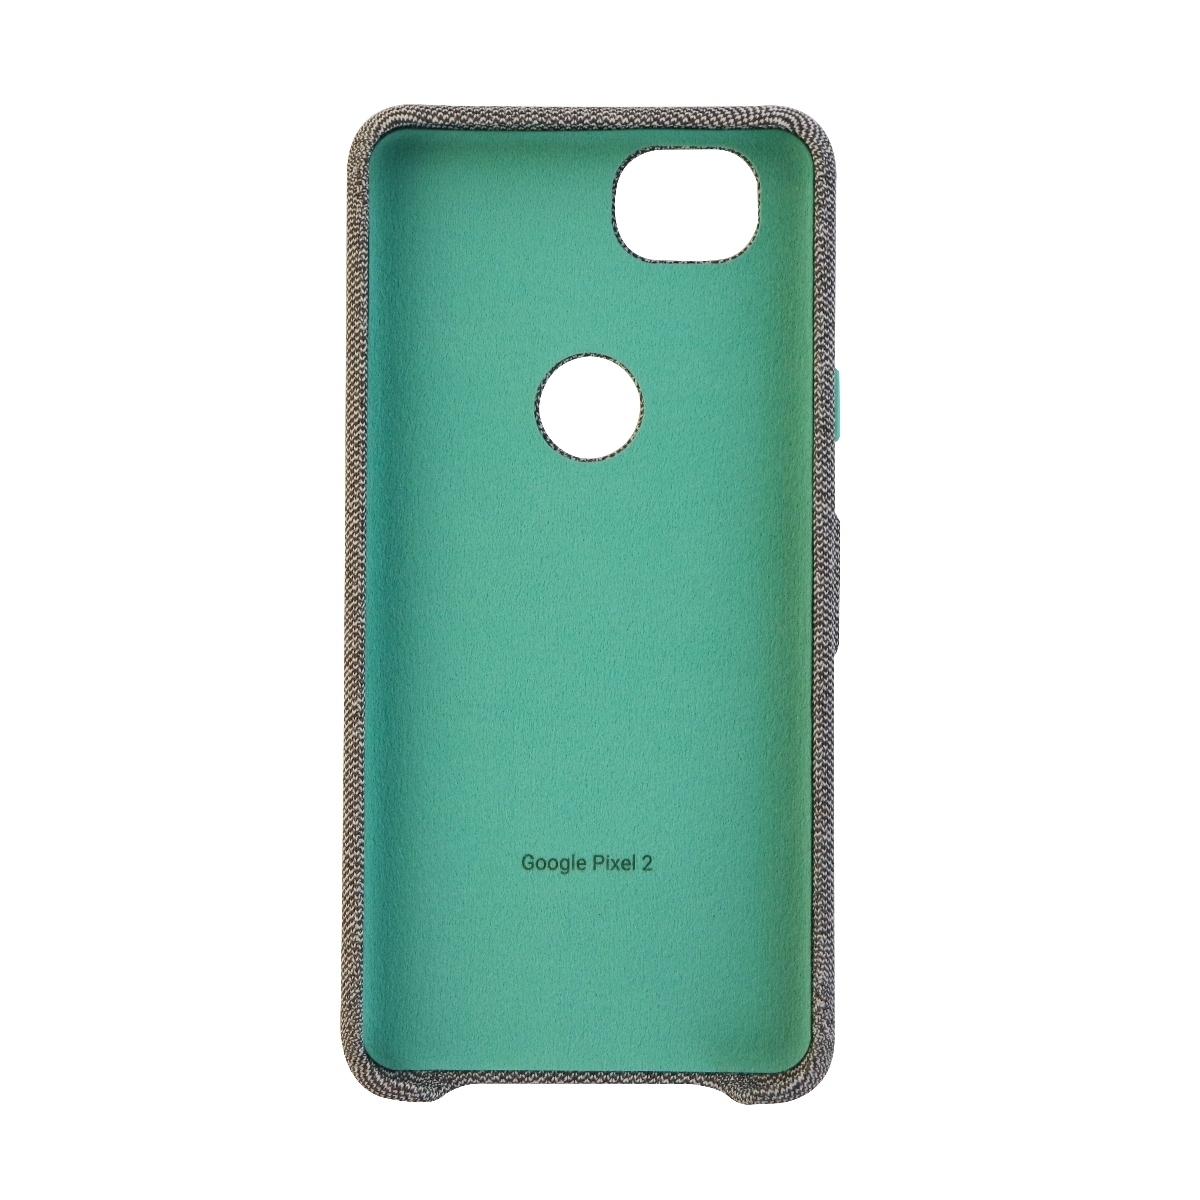 Official Google Fabric Case For Google Pixel 2 Smartphone - Gray/Teal